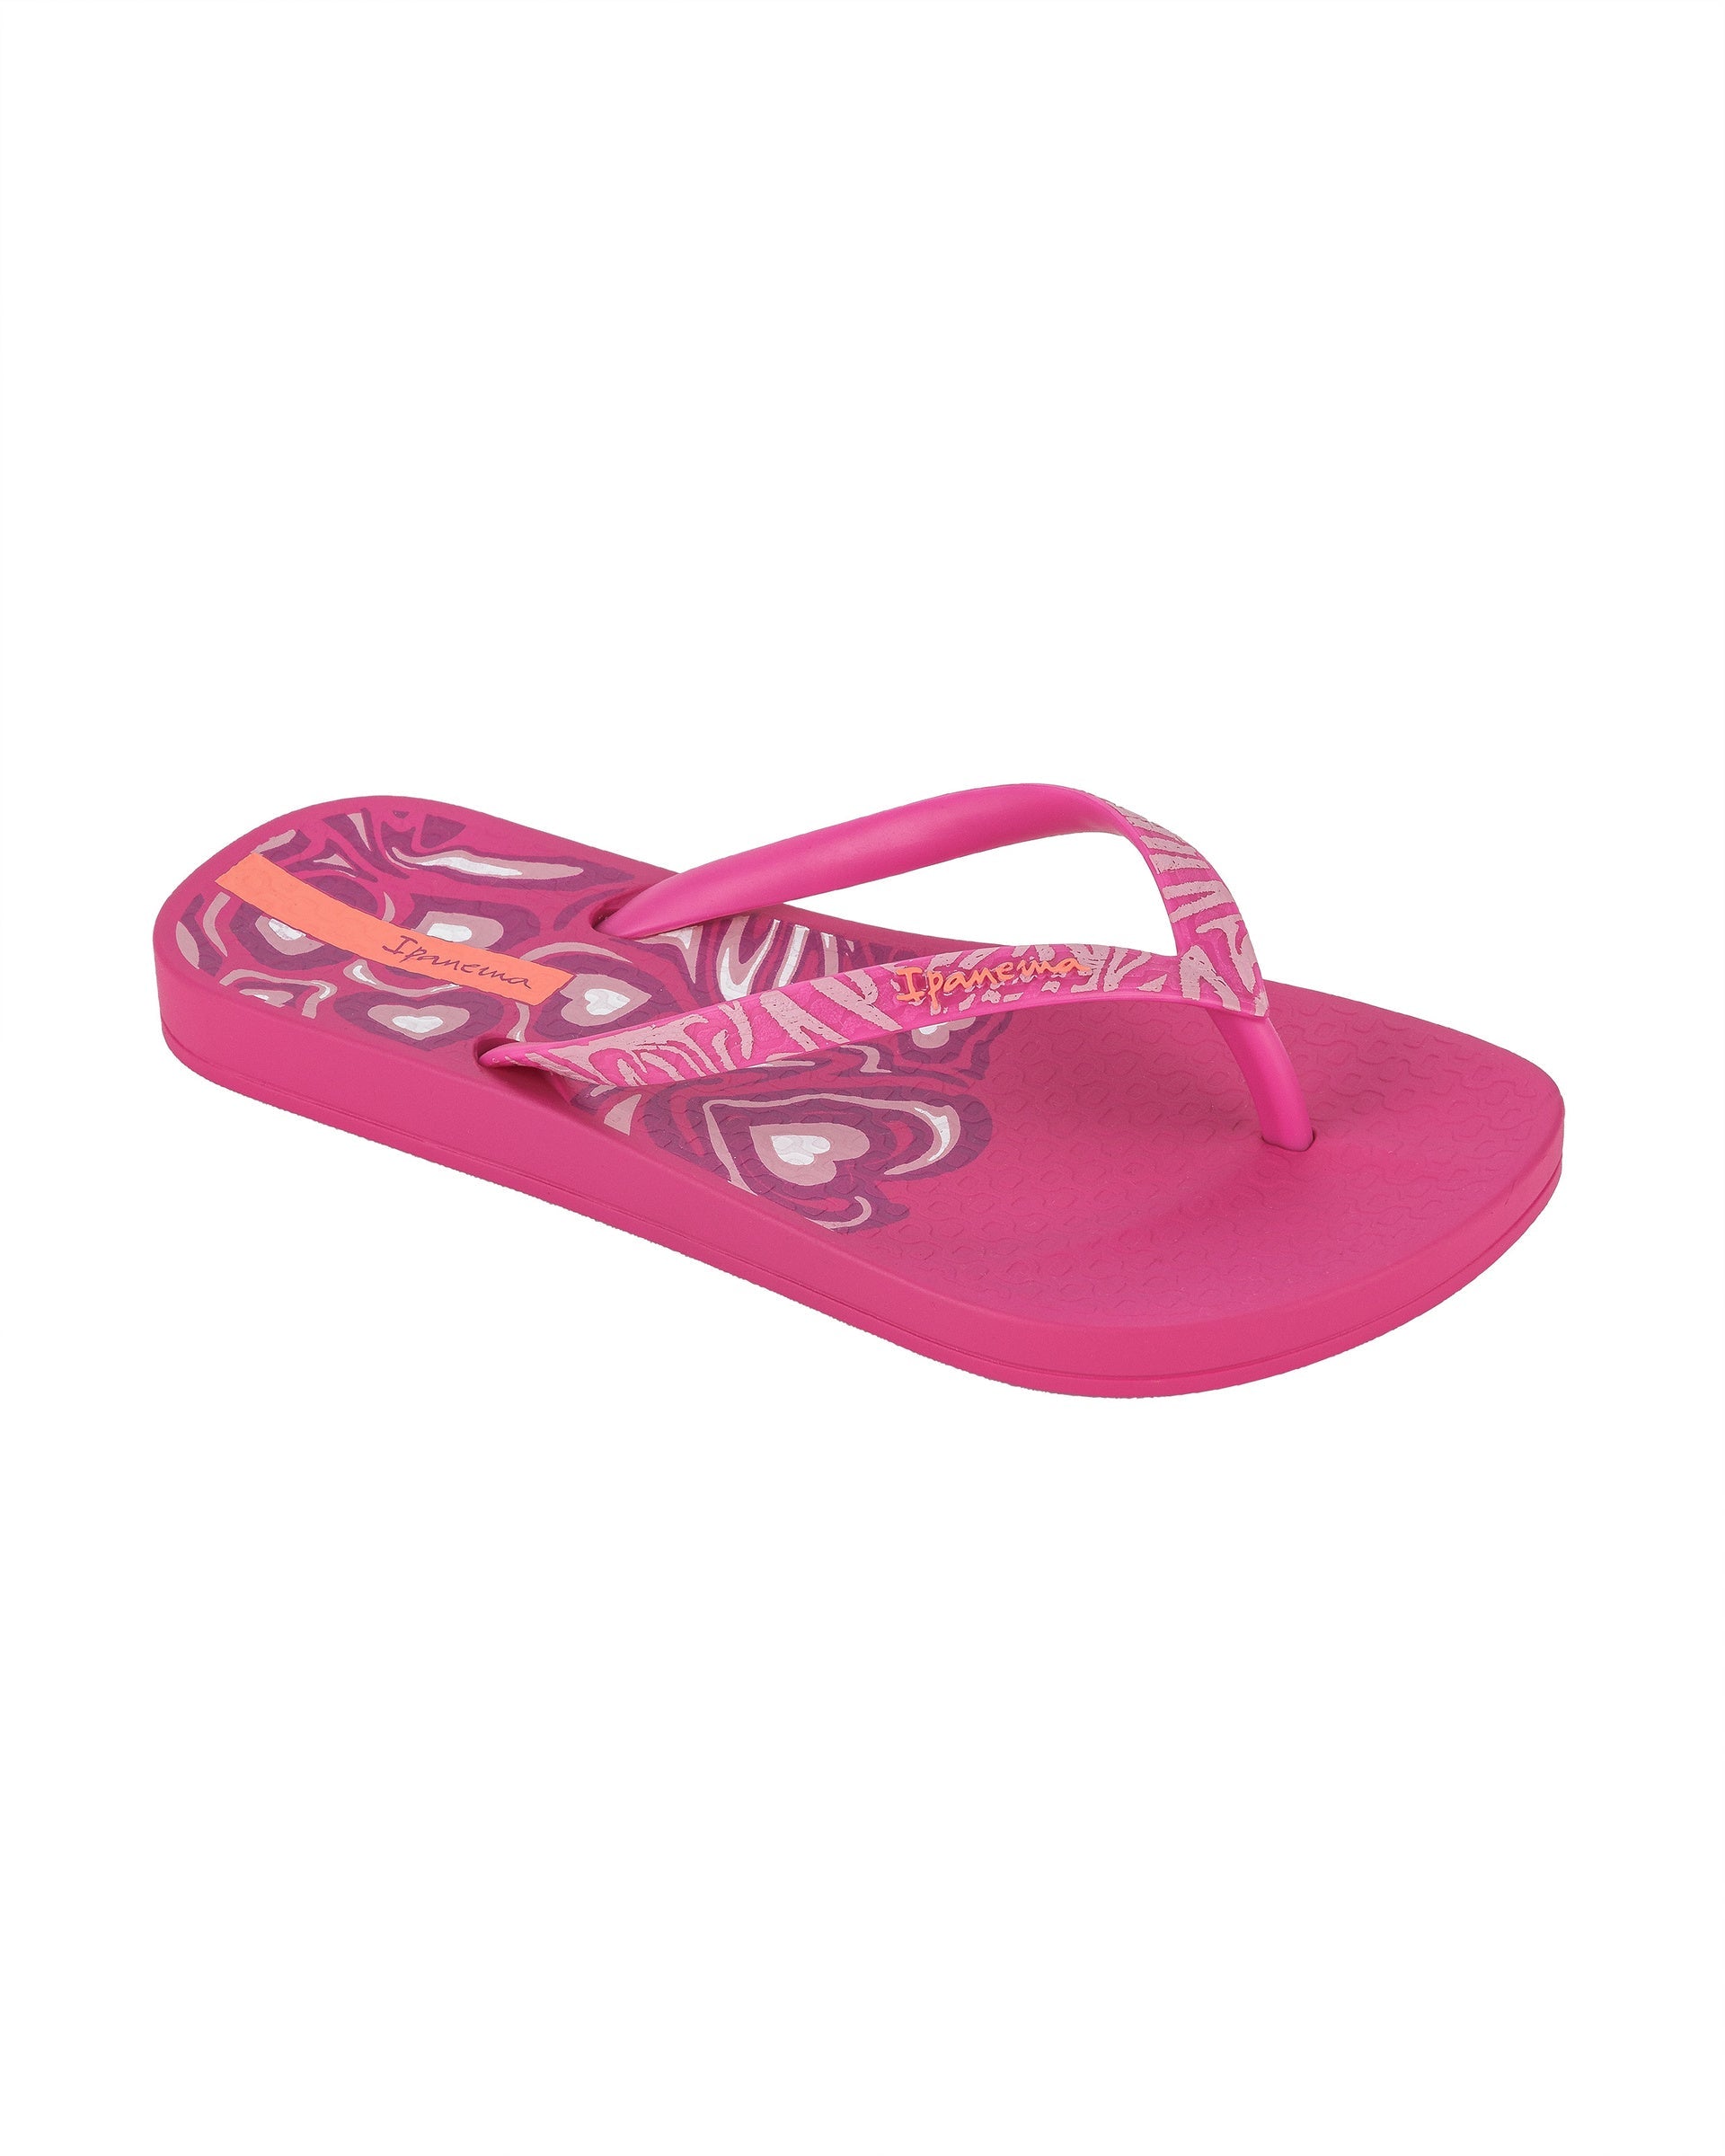 Angled view of a pink Ipanema Nostalgic Hearts kid's flip flop with heart outlines on insole and strap.